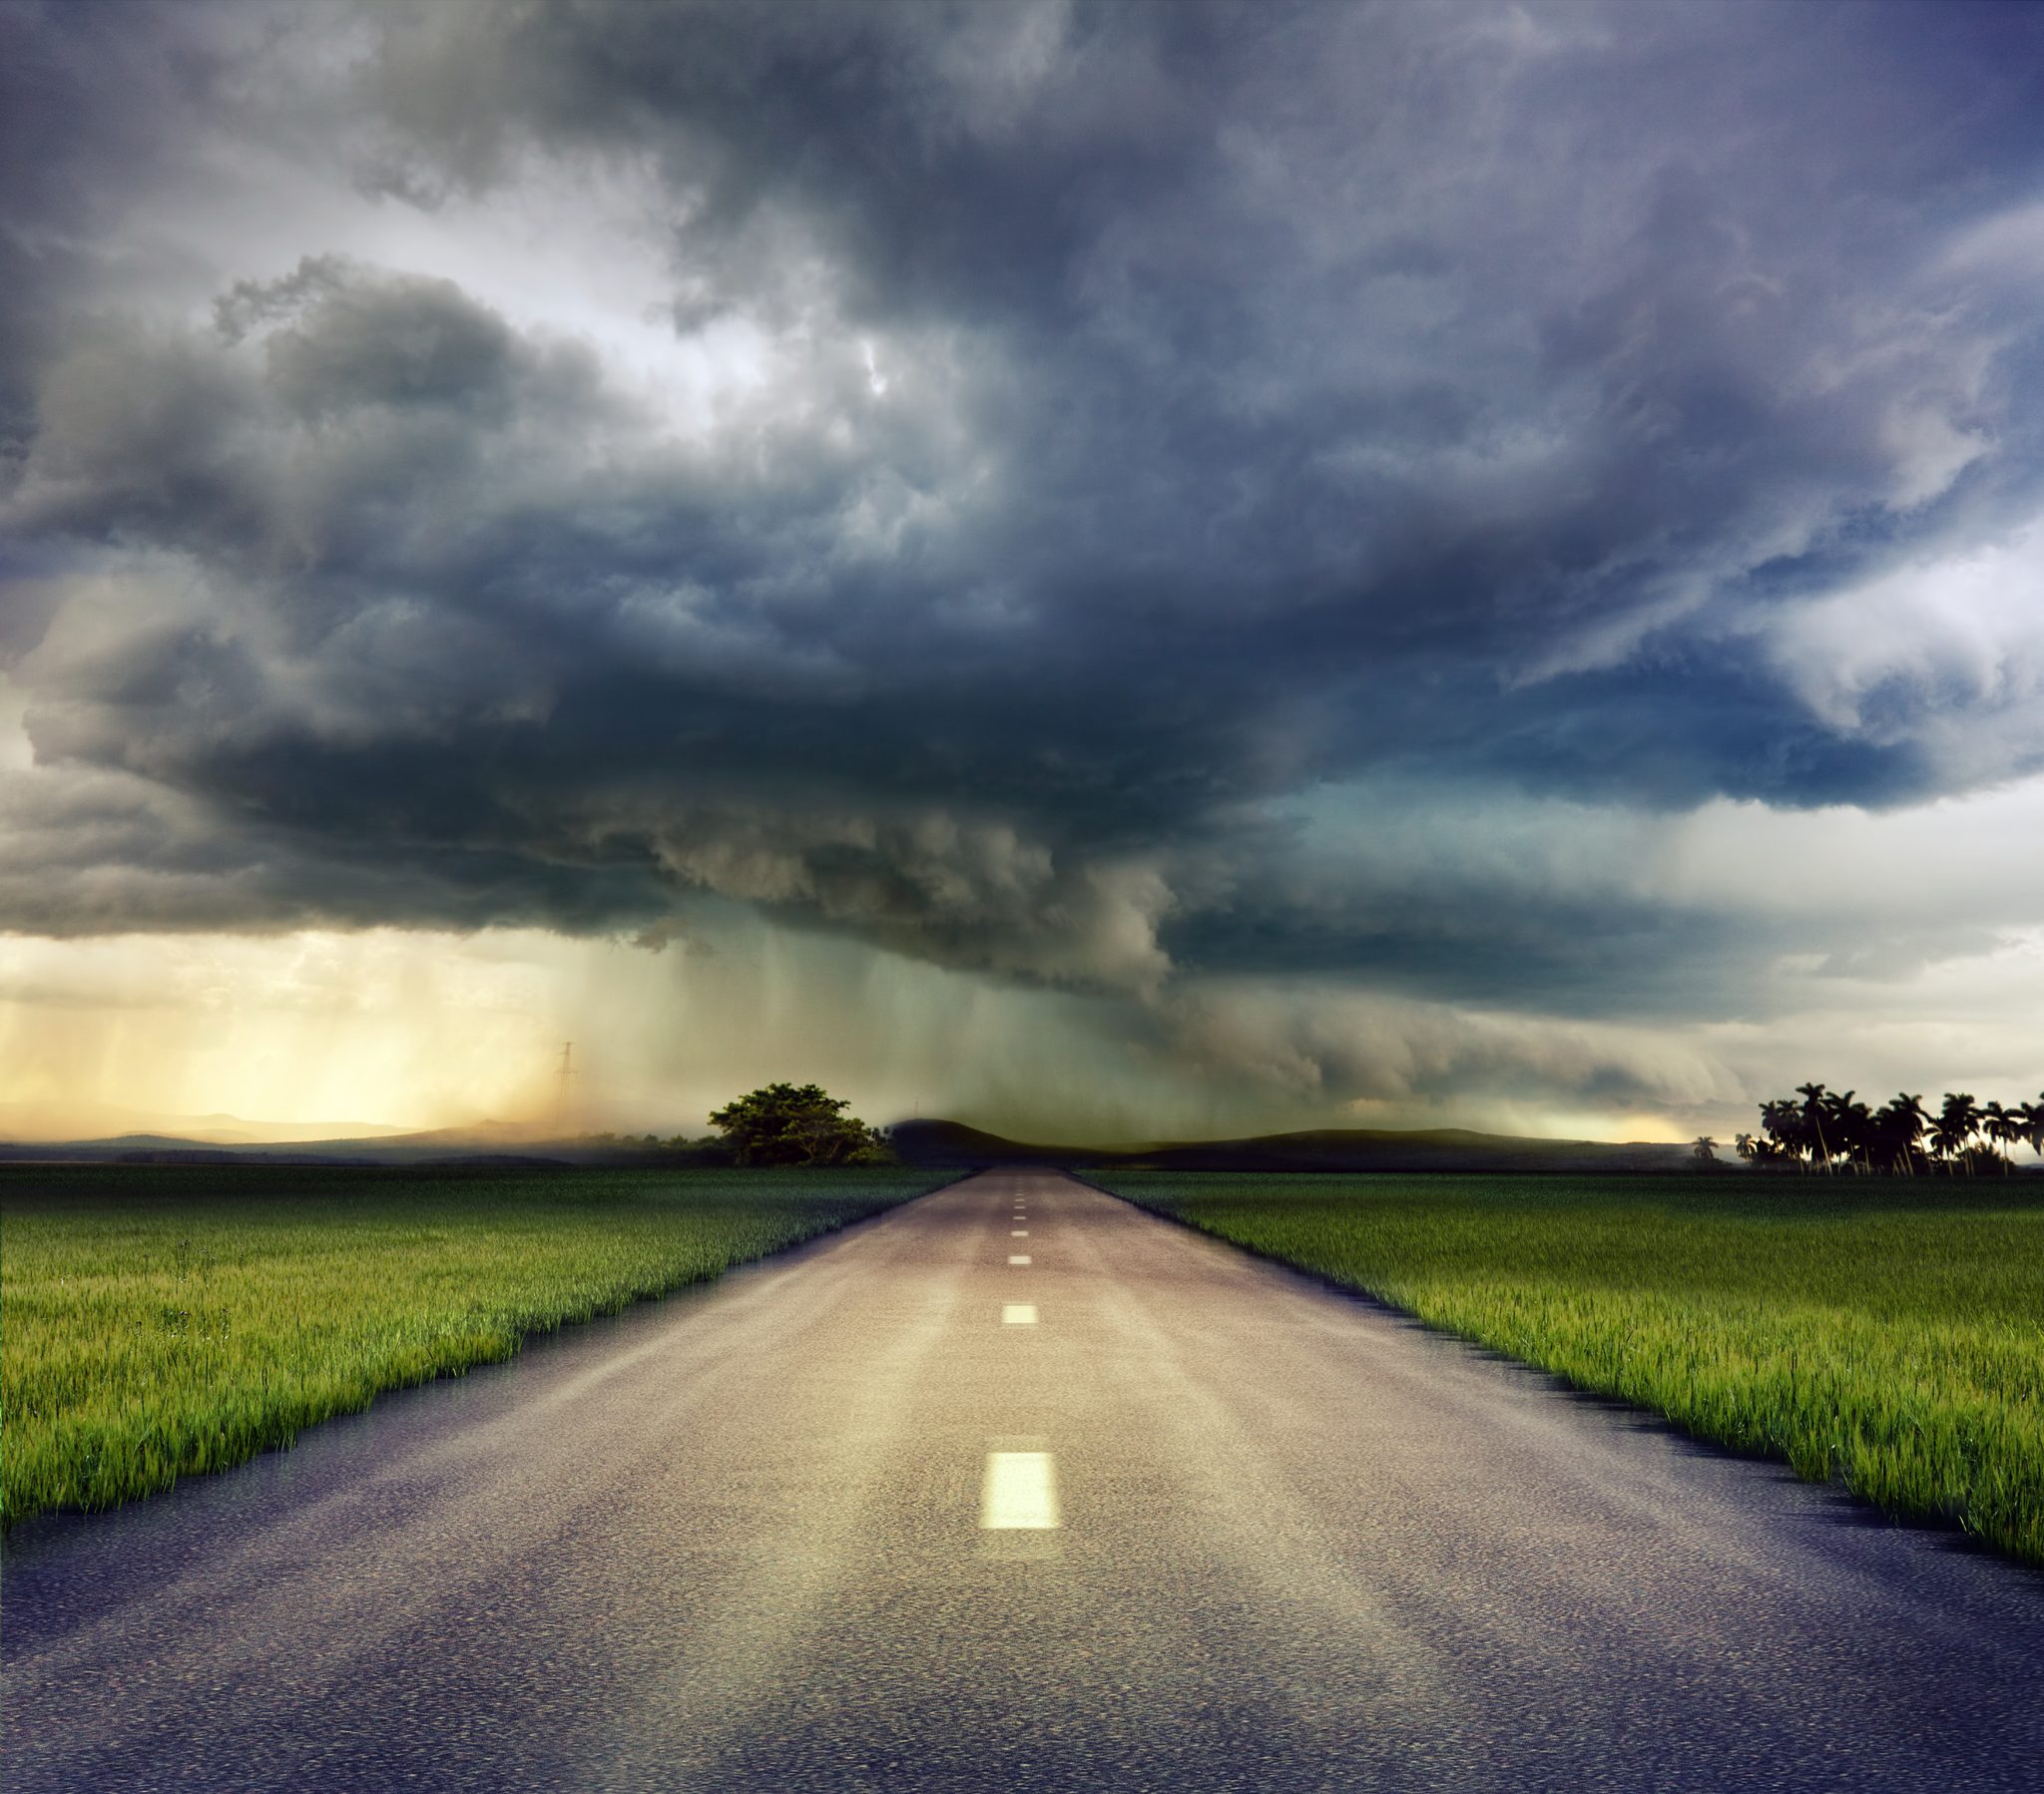 The road to storm